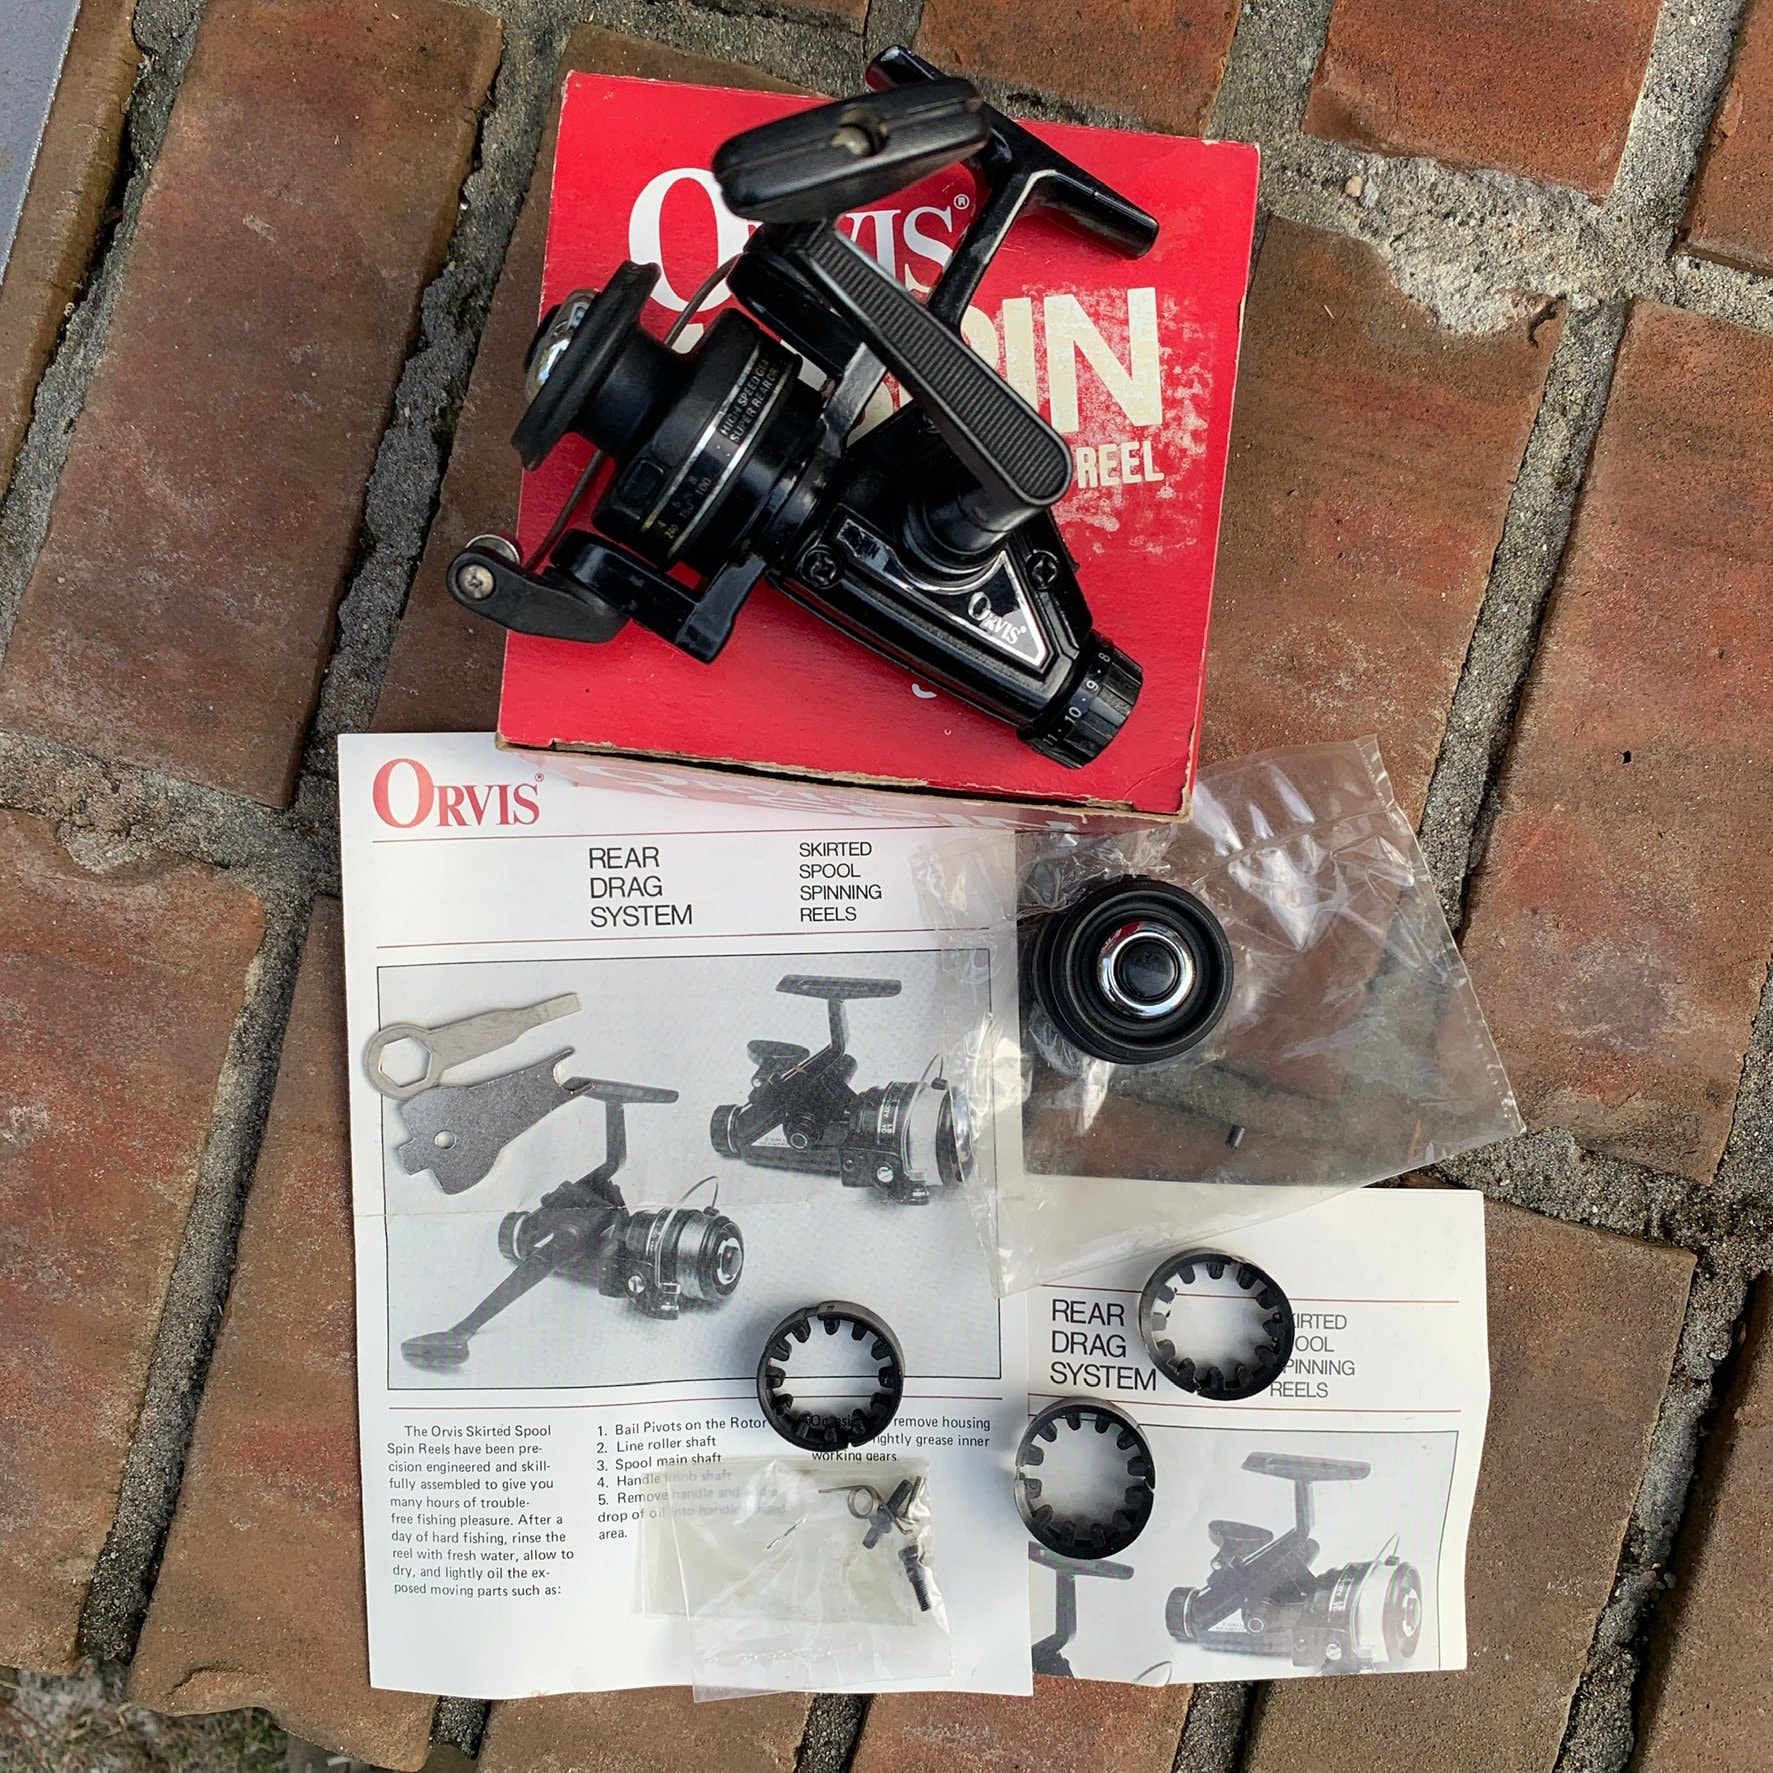 Orvis Spin 1 Reel With Original Orvis Box, Papers, Tools and Many Parts  Nice 